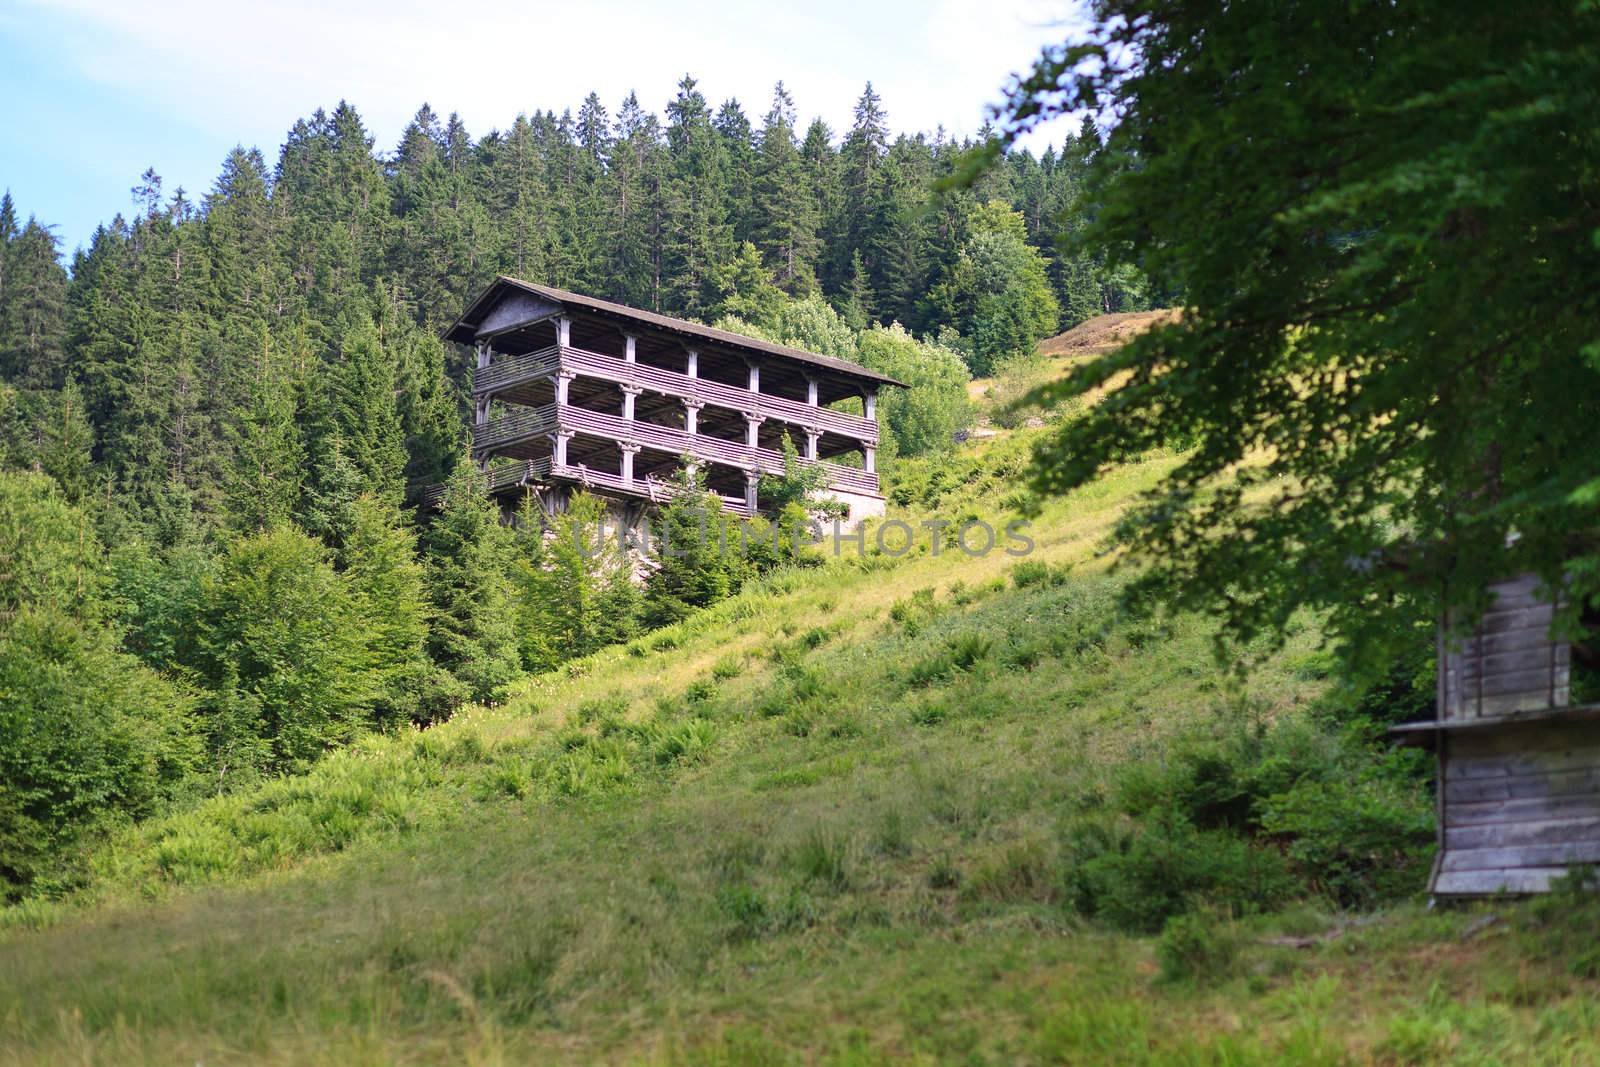 idylic contry home at montain in natur